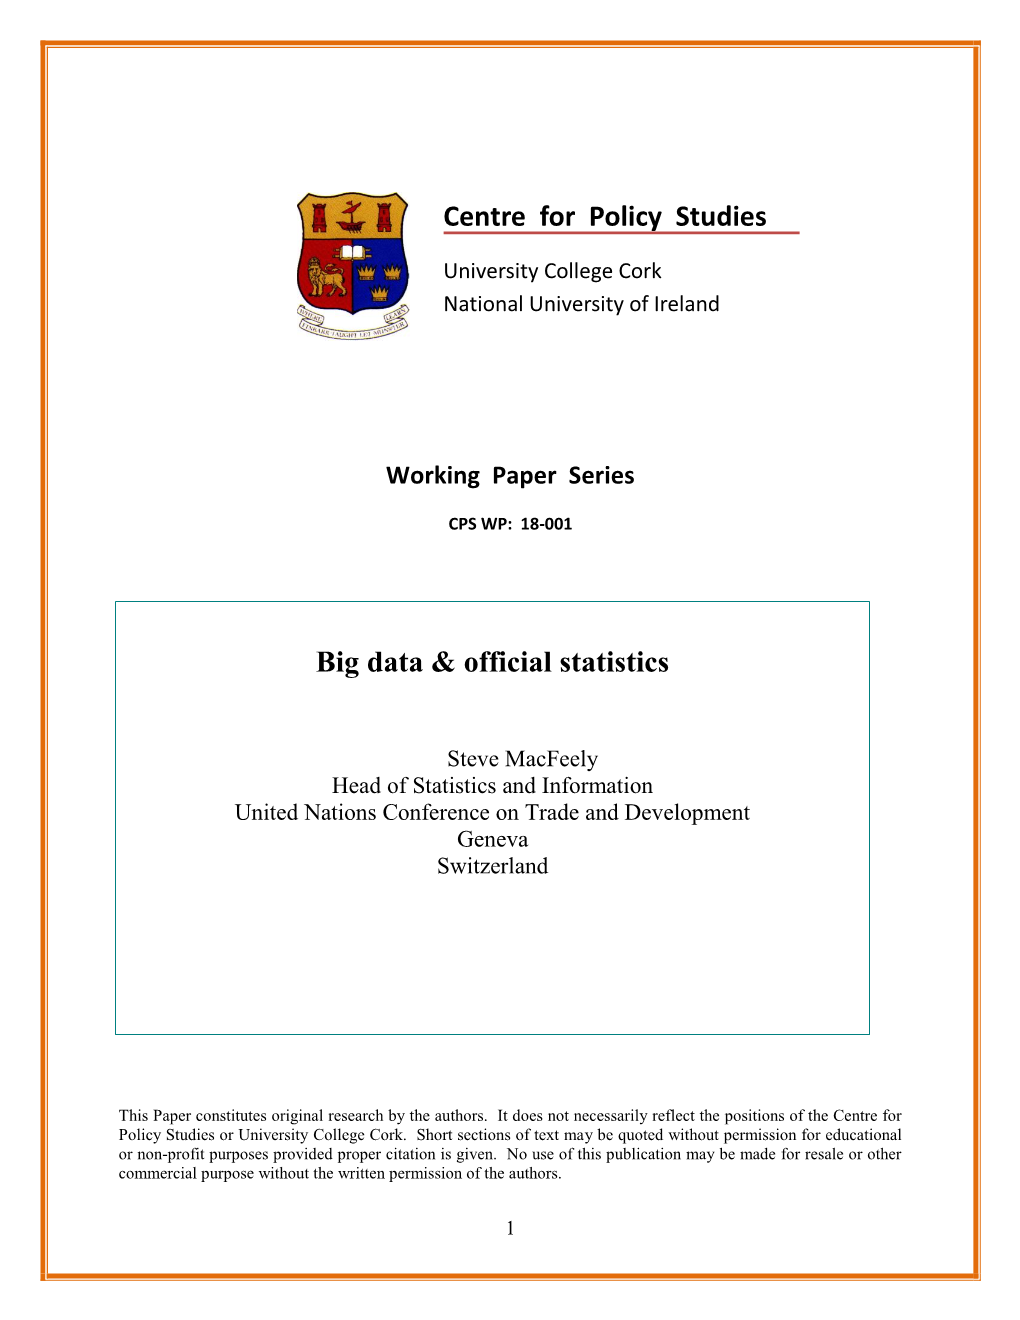 Centre for Policy Studies Big Data & Official Statistics